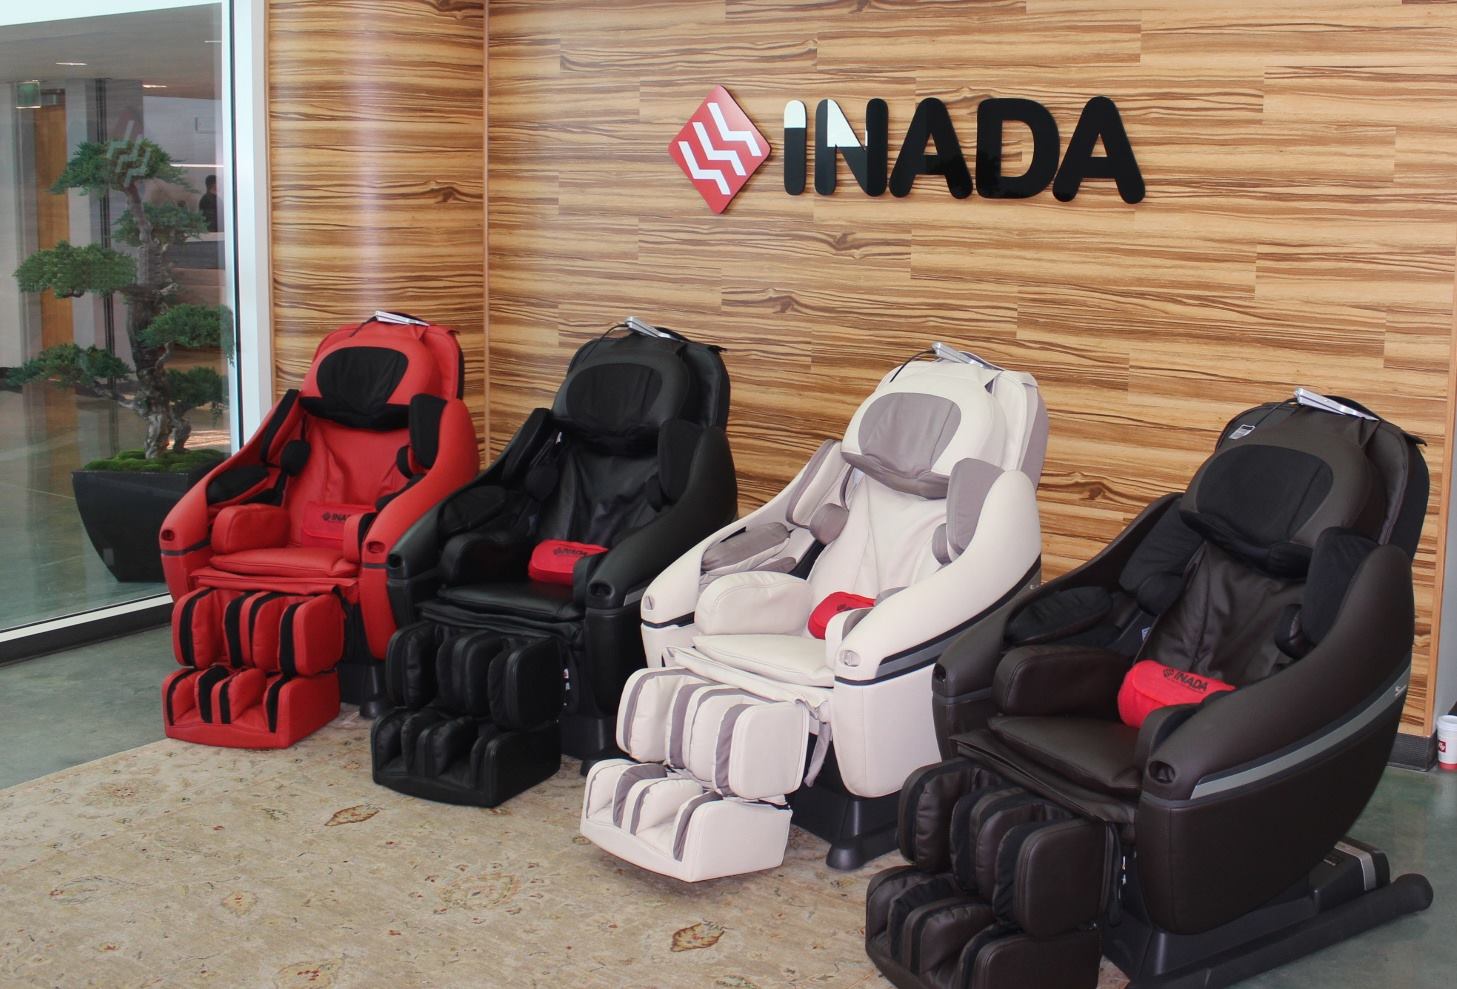 Inada Massage Chairs at Costco Great Oaks